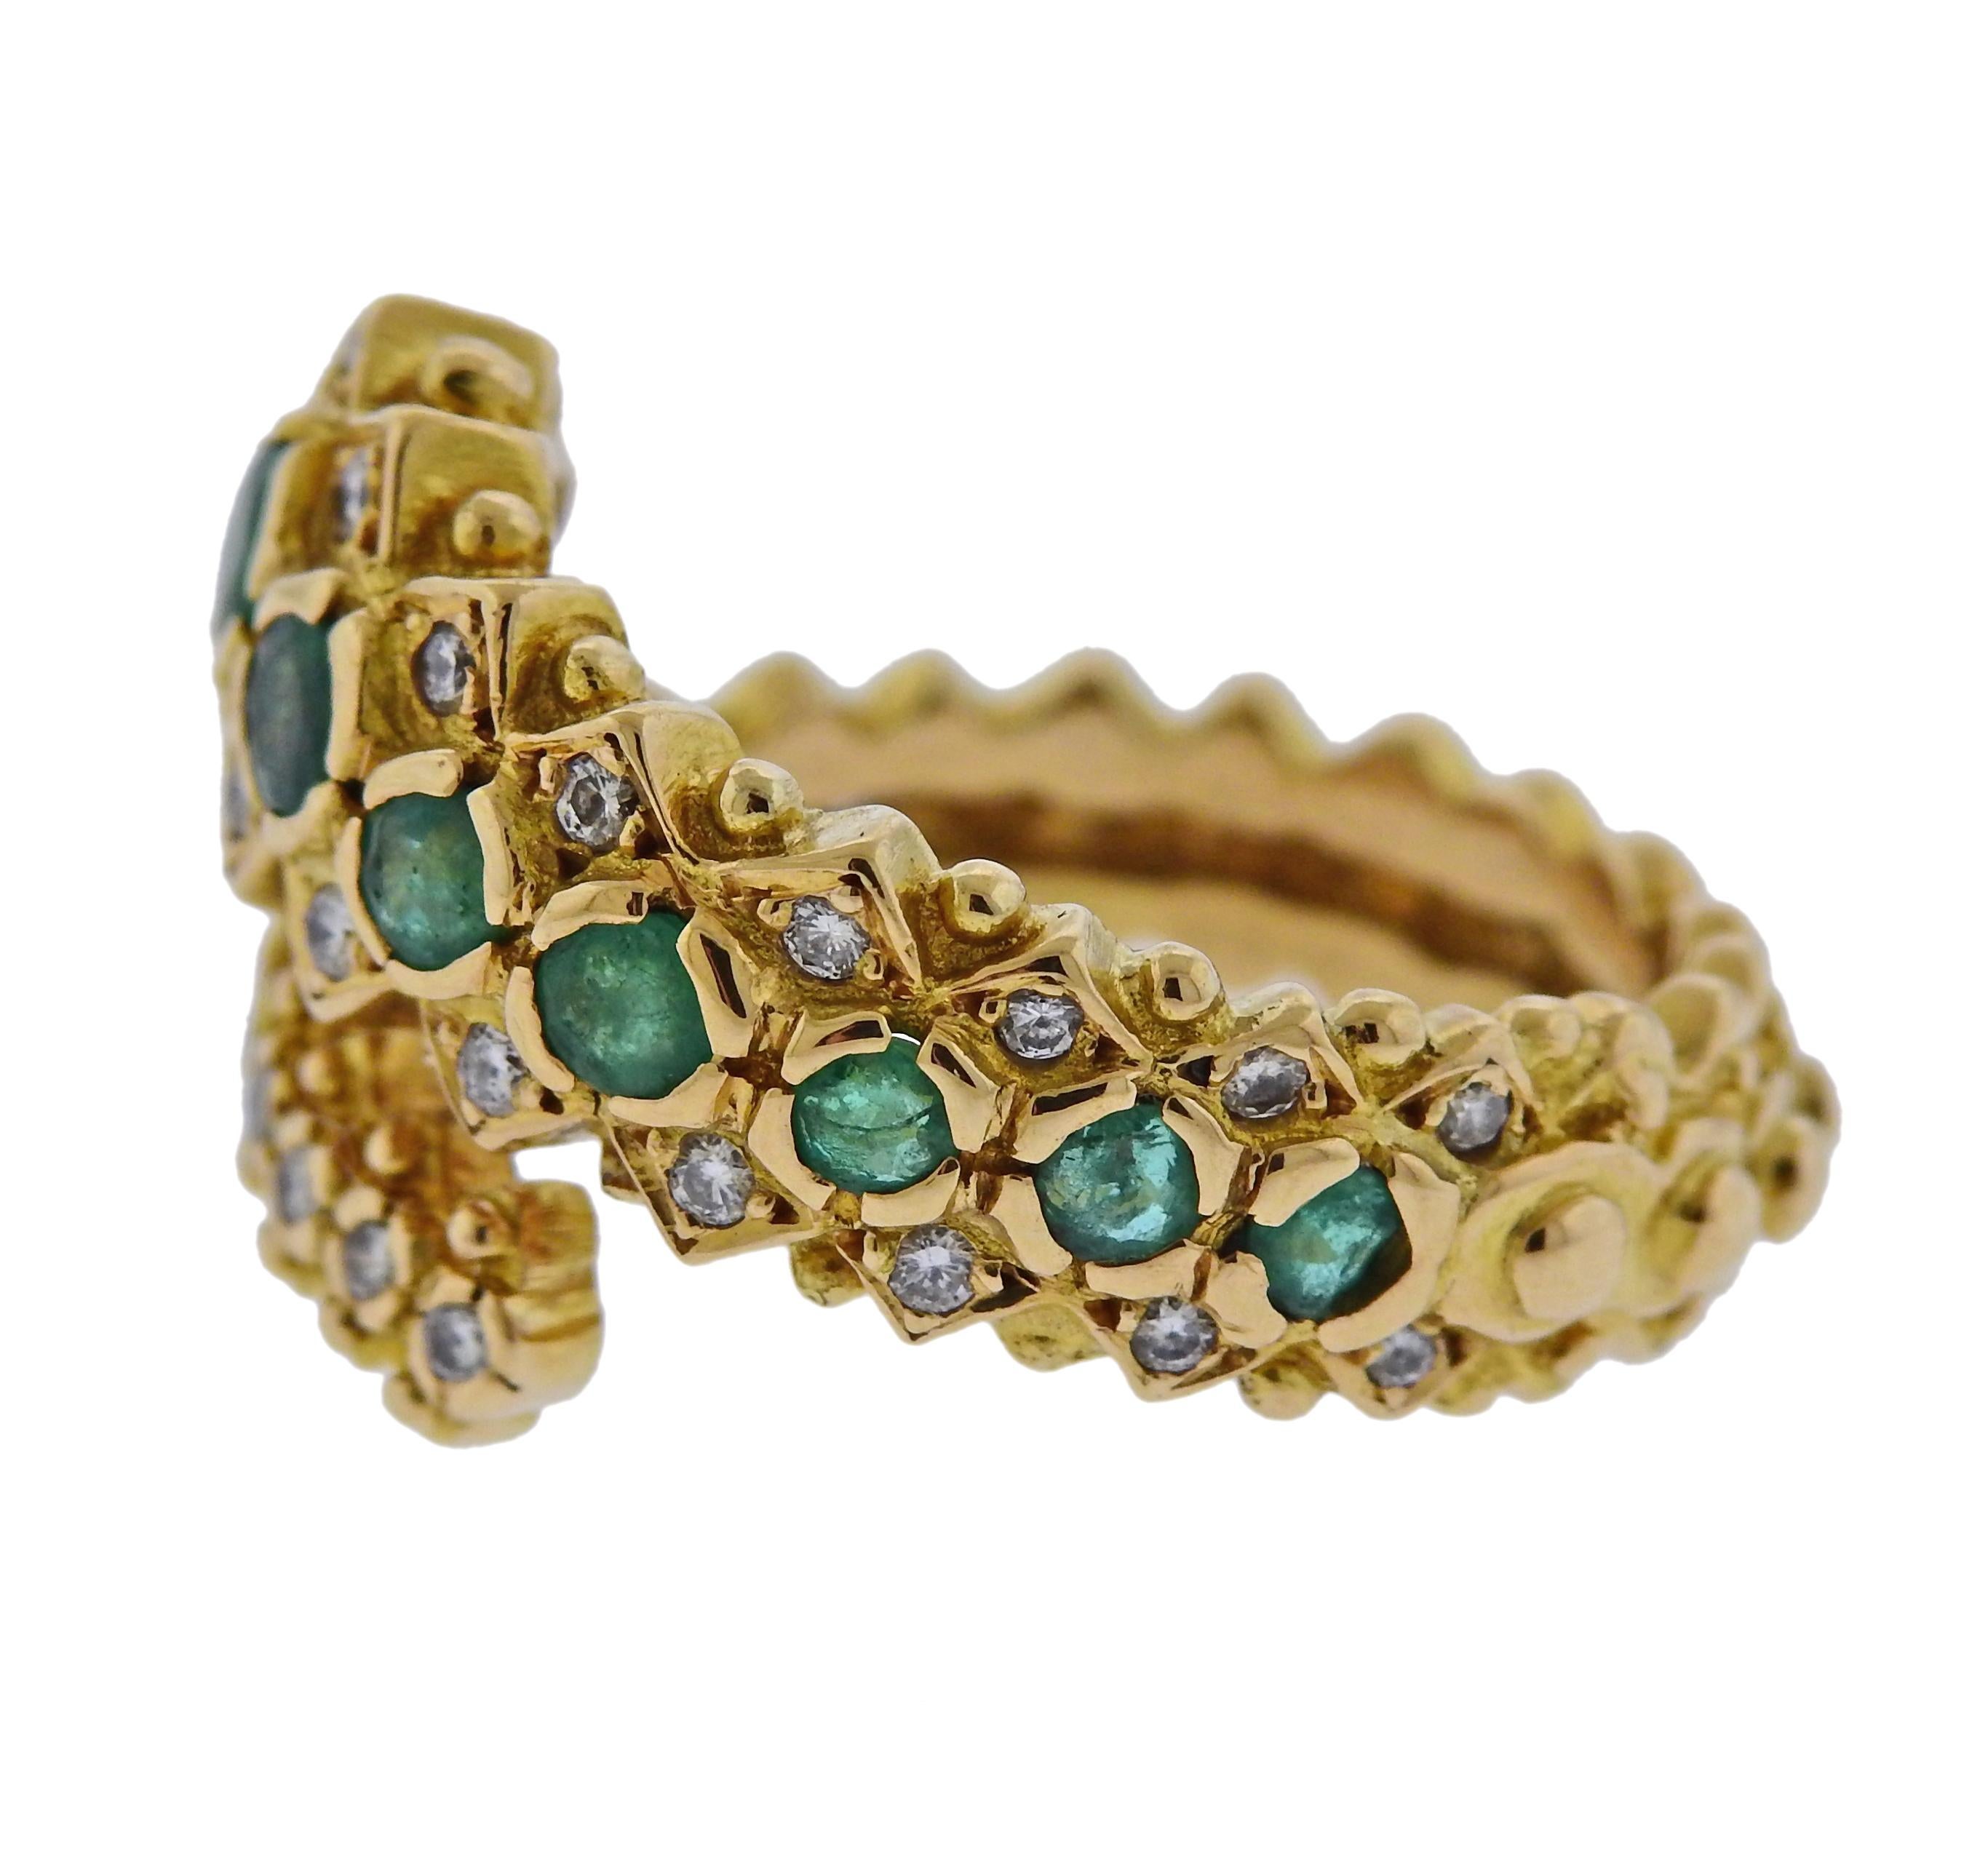 18k yellow gold ring, designed by Lalaounis, decorated with emeralds and approx. 0.26ctw in diamonds.  Ring size - 8.25, ring top is 16mm wide, weighs 11.7 grams. Marked:  750, A21, Maker's hallmark.  